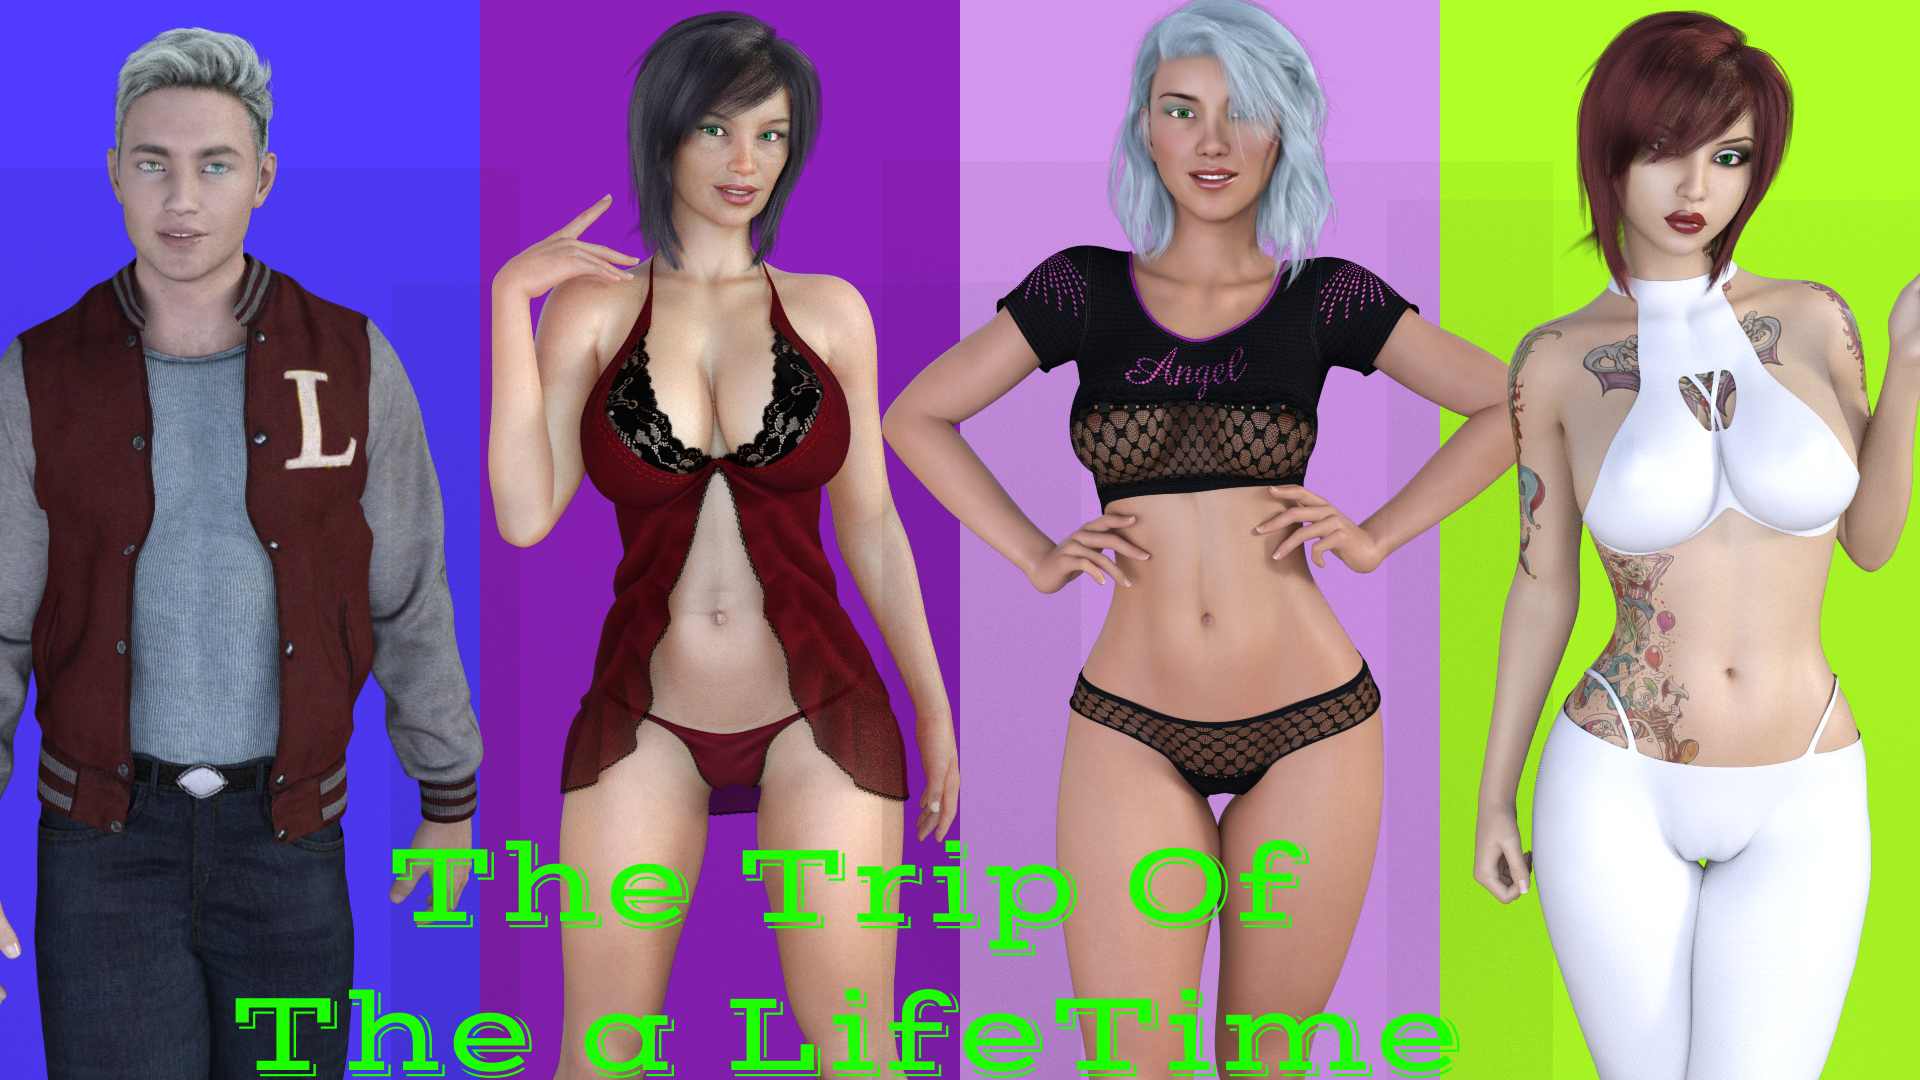 The Trip of a Lifetime [Darkside_games] Adult xxx Game Download